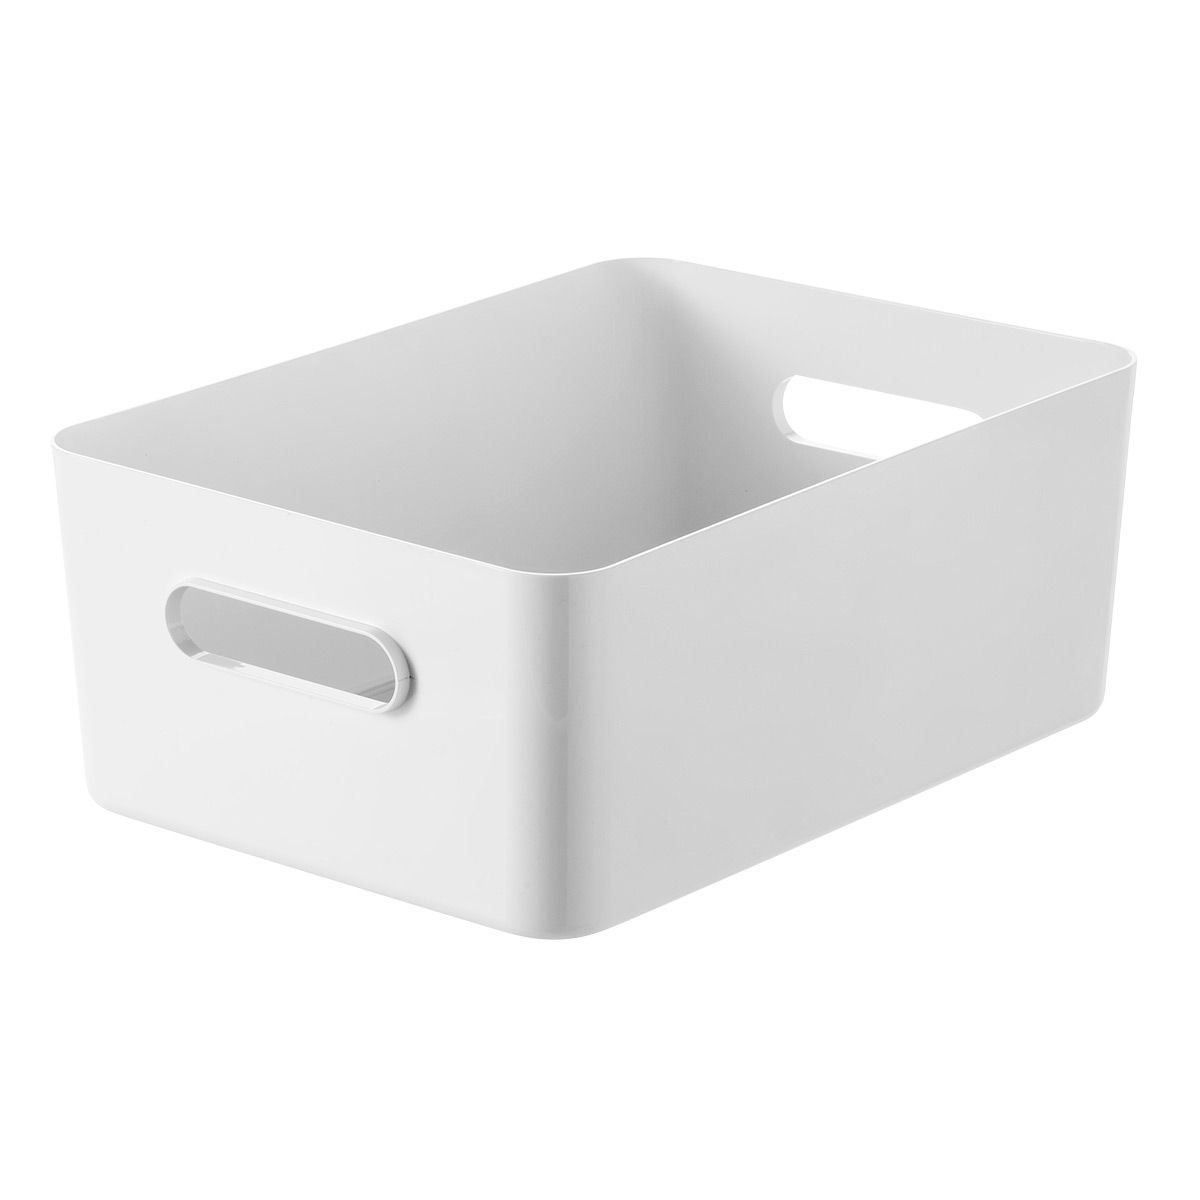 SmartStore Large Compact Plastic Bin w/ Handles White | The Container Store